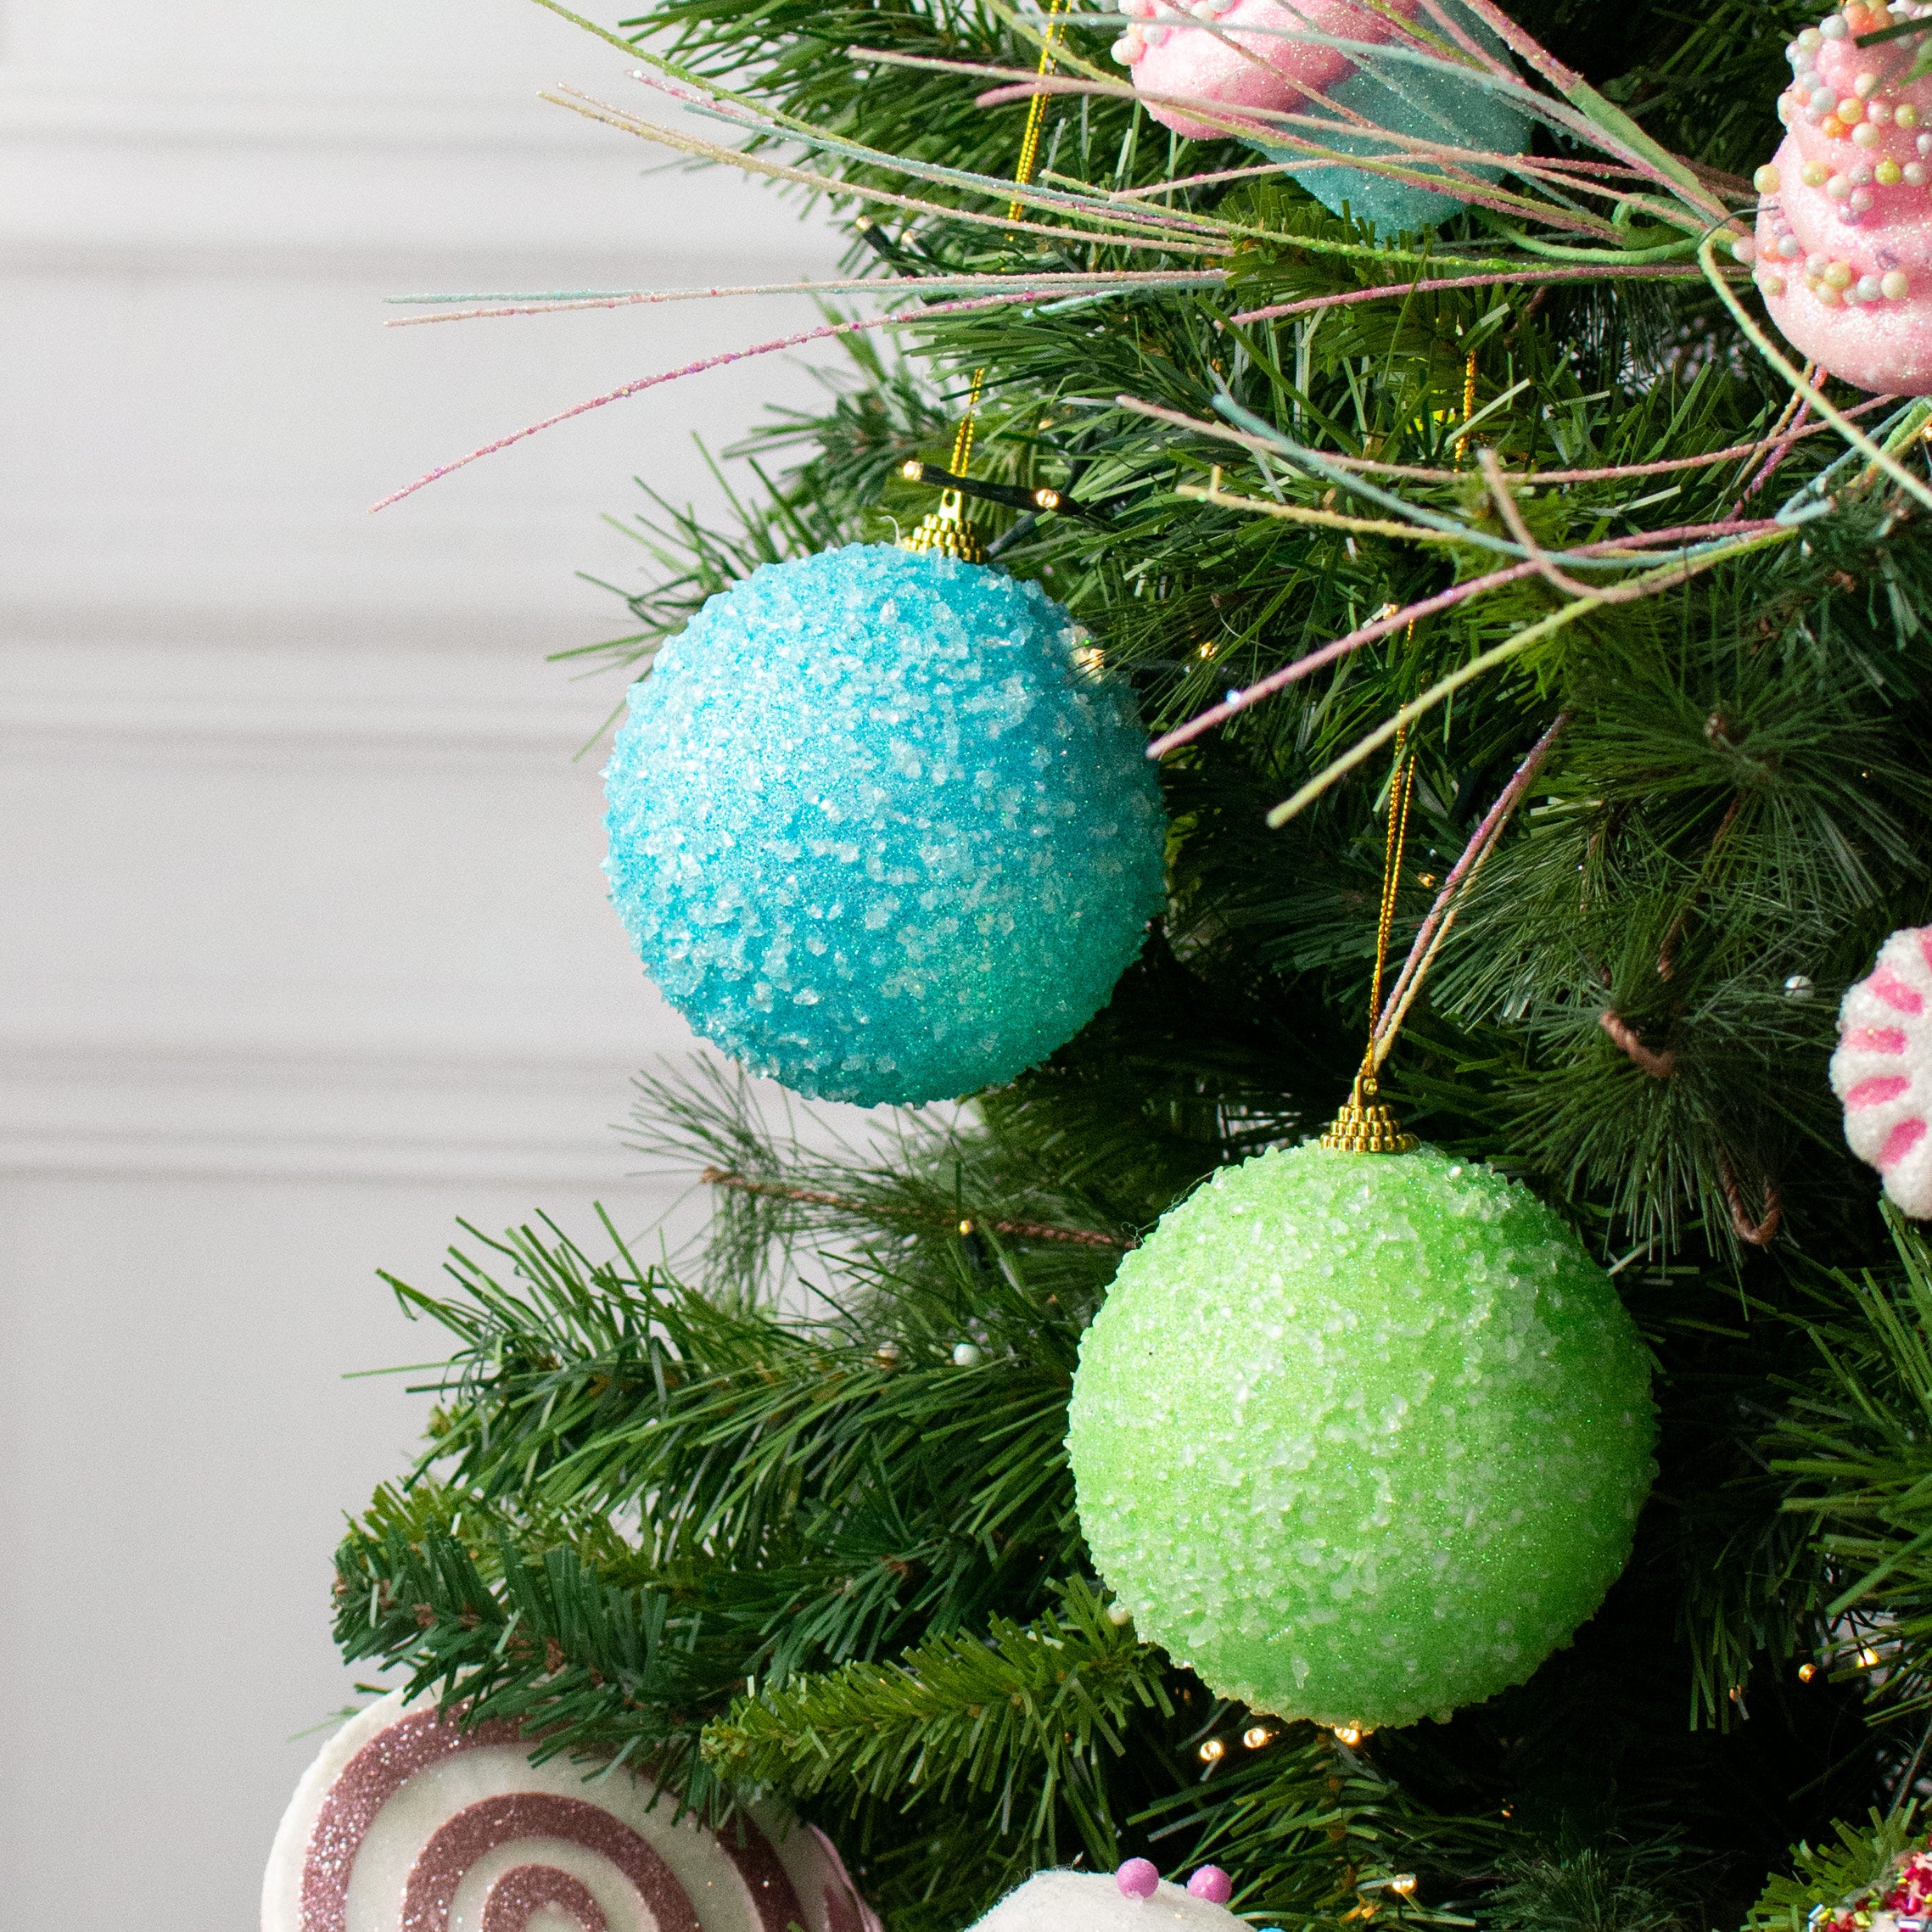 4" Icy Ball Ornament: Light Blue